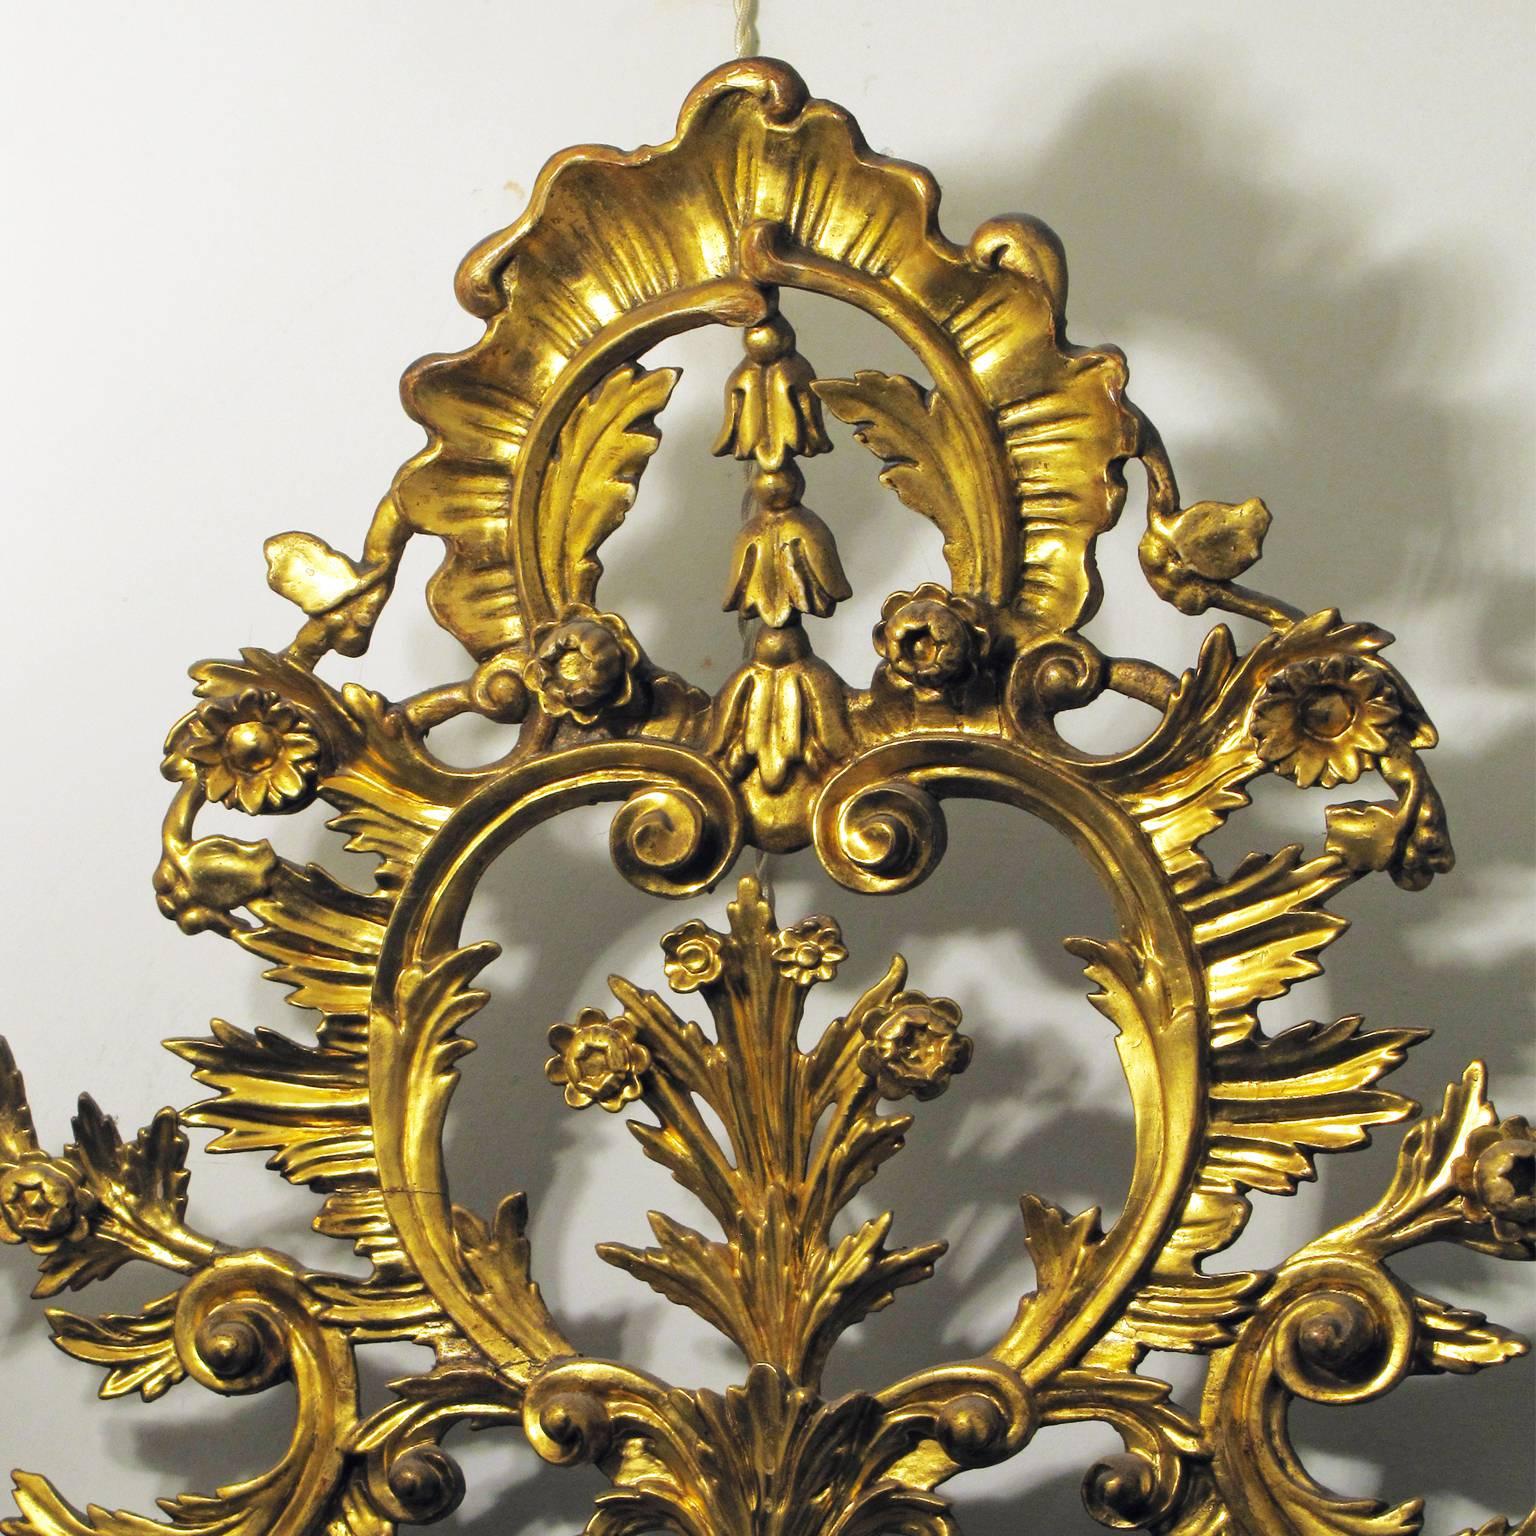 A Tuscan Louis XVI mirror in a carved and leaf gilded wooden frame with floral scrolls, acanthus leaf reliefs and original silvered mirror plate. Made in Lucca at the late 18th century, in the style of Louis XVI.